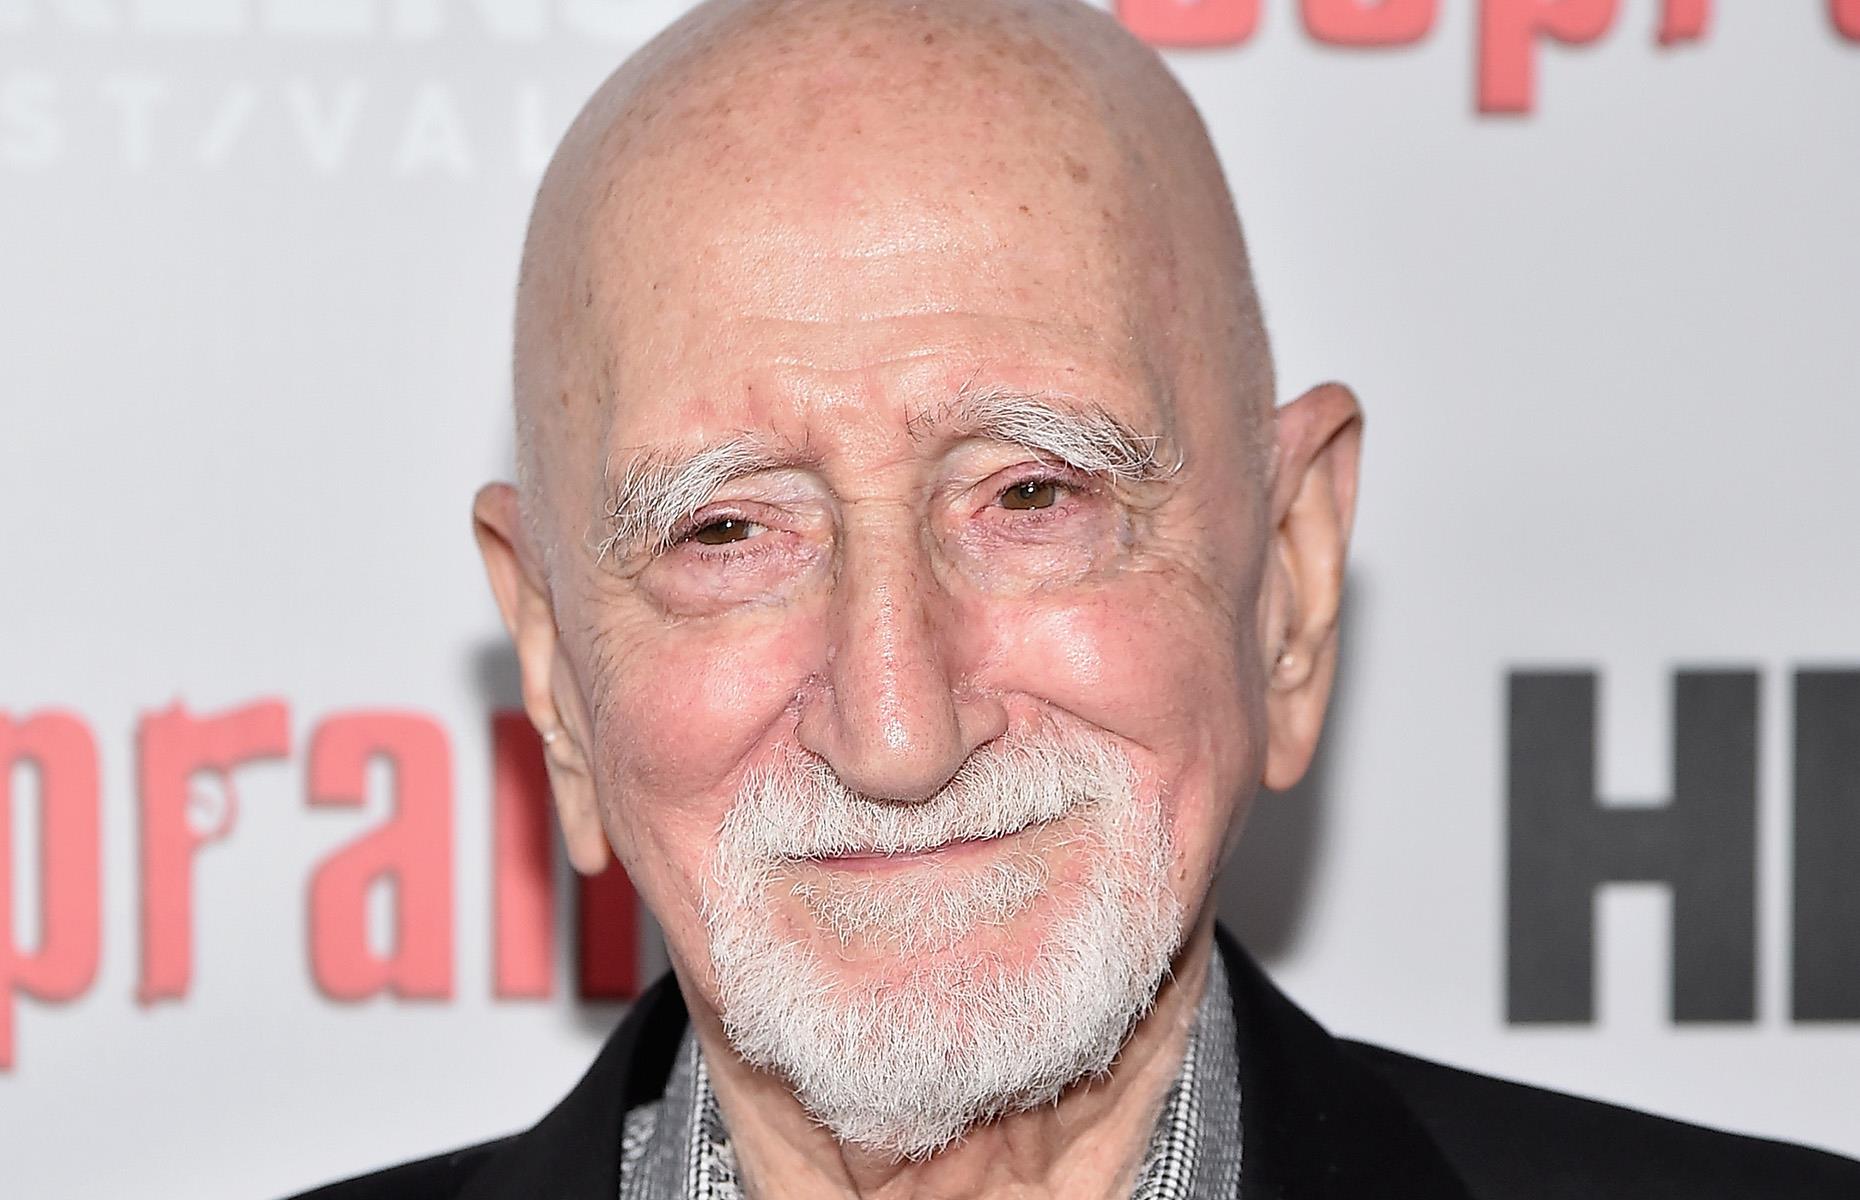 <p>Chianese went on to star in another HBO hit, <em>Boardwalk Empire</em>, between 2011 and 2013. Other notable post-<em>Sopranos</em> roles include the Jim Carrey-led comedy flick <em>Mr. Popper's Penguins</em> and the TV shows <em>The Good Wife</em> and <em>Blue Bloods</em>. </p>  <p>In addition to acting, Chianese published a memoir,<em> Twelve Angels: The Women Who Taught Me How to Act, Live, and Love</em>, in 2018.</p>  <p>The 92-year-old has continued to work into his twilight years, most recently appearing in the 2022 short film <em>The Old Guitarist.</em></p>  <p>Decades in the entertainment industry have earned the veteran star an estimated net worth of $10 million (£8m) to $15 million (£12m). </p>